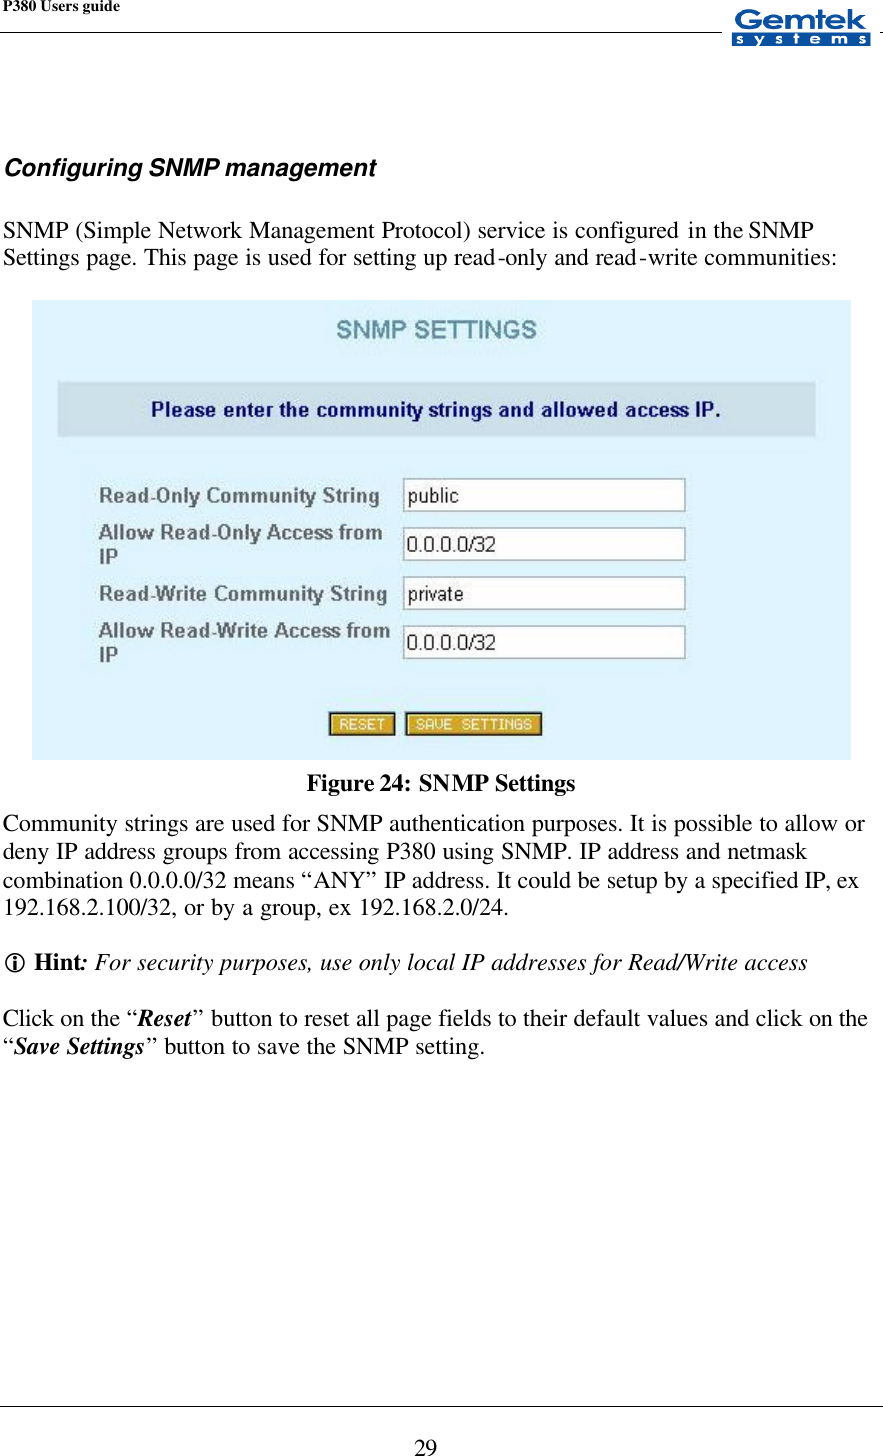 P380 Users guide            29   Configuring SNMP management  SNMP (Simple Network Management Protocol) service is configured in the SNMP Settings page. This page is used for setting up read-only and read-write communities:   Figure 24: SNMP Settings Community strings are used for SNMP authentication purposes. It is possible to allow or deny IP address groups from accessing P380 using SNMP. IP address and netmask combination 0.0.0.0/32 means “ANY” IP address. It could be setup by a specified IP, ex 192.168.2.100/32, or by a group, ex 192.168.2.0/24.  i Hint: For security purposes, use only local IP addresses for Read/Write access  Click on the “Reset” button to reset all page fields to their default values and click on the “Save Settings” button to save the SNMP setting.         